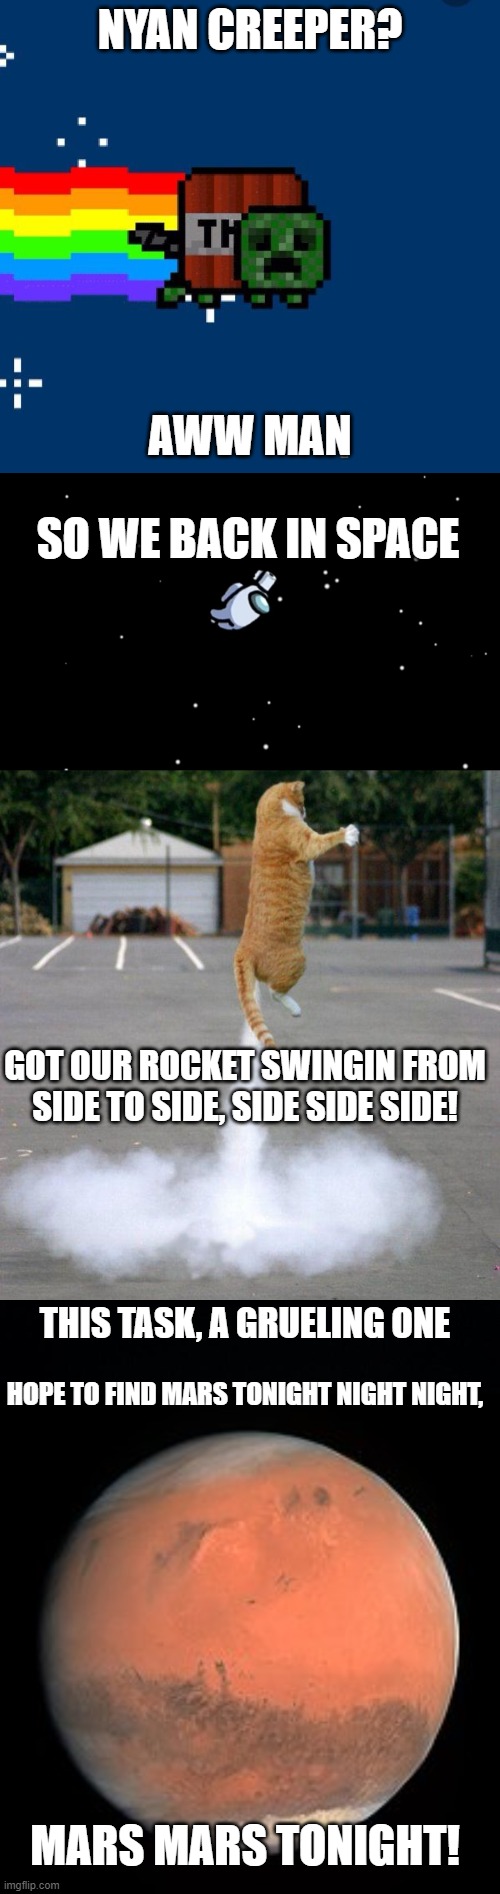 Space | NYAN CREEPER? AWW MAN; SO WE BACK IN SPACE; GOT OUR ROCKET SWINGIN FROM SIDE TO SIDE, SIDE SIDE SIDE! THIS TASK, A GRUELING ONE; HOPE TO FIND MARS TONIGHT NIGHT NIGHT, MARS MARS TONIGHT! | image tagged in nyan creeper,among us ejected,rocket cat,revenge,creeper aww man | made w/ Imgflip meme maker